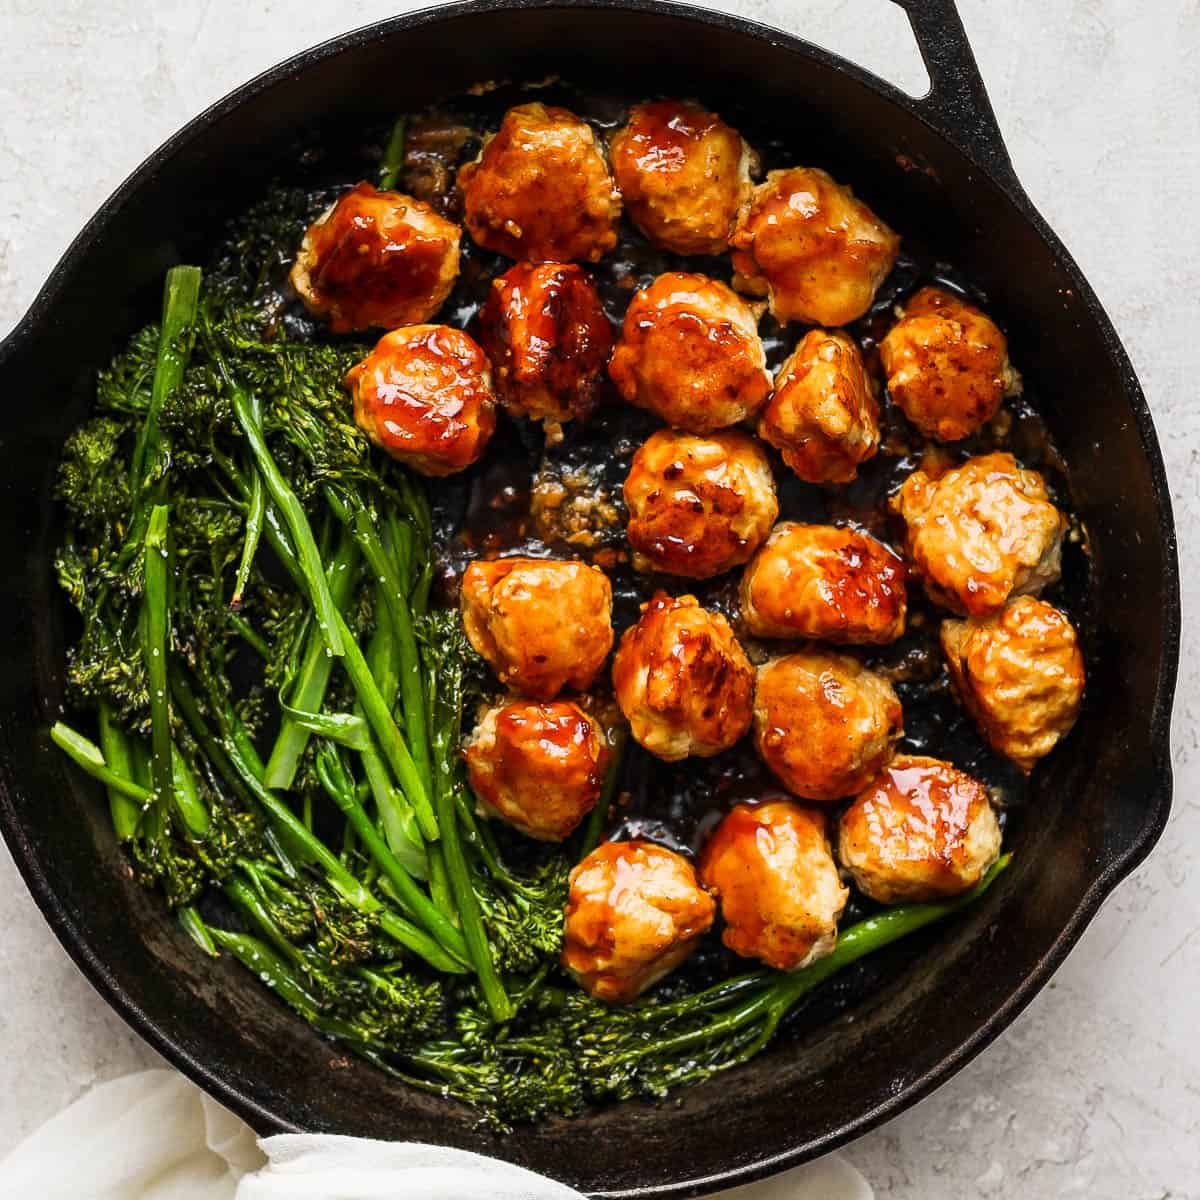 Cast iron skillet filled with teriyaki chicken meatballs and broccolini.